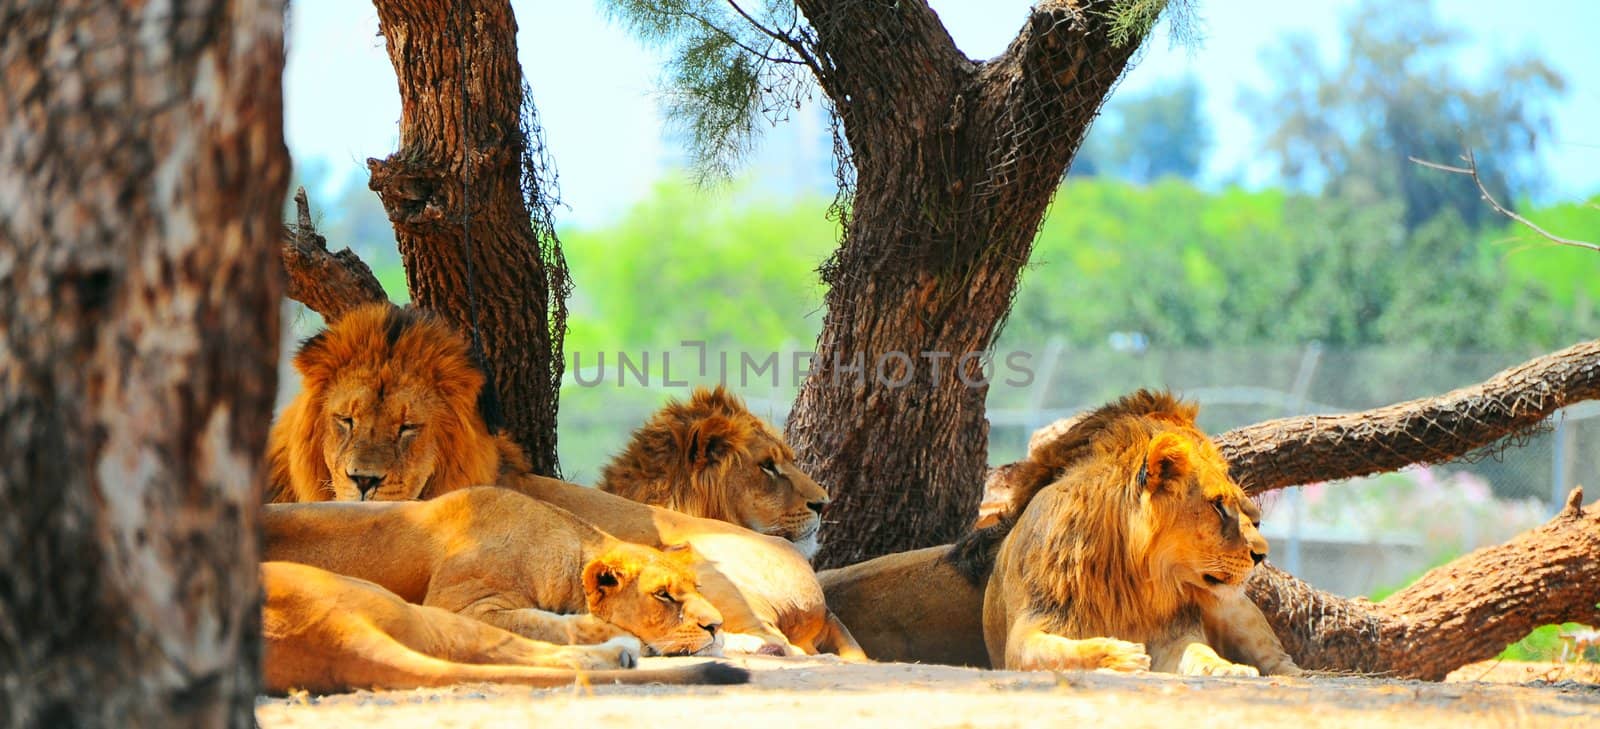 Lions Rest Most of the Time and Only Hunt Once Every Few Days.